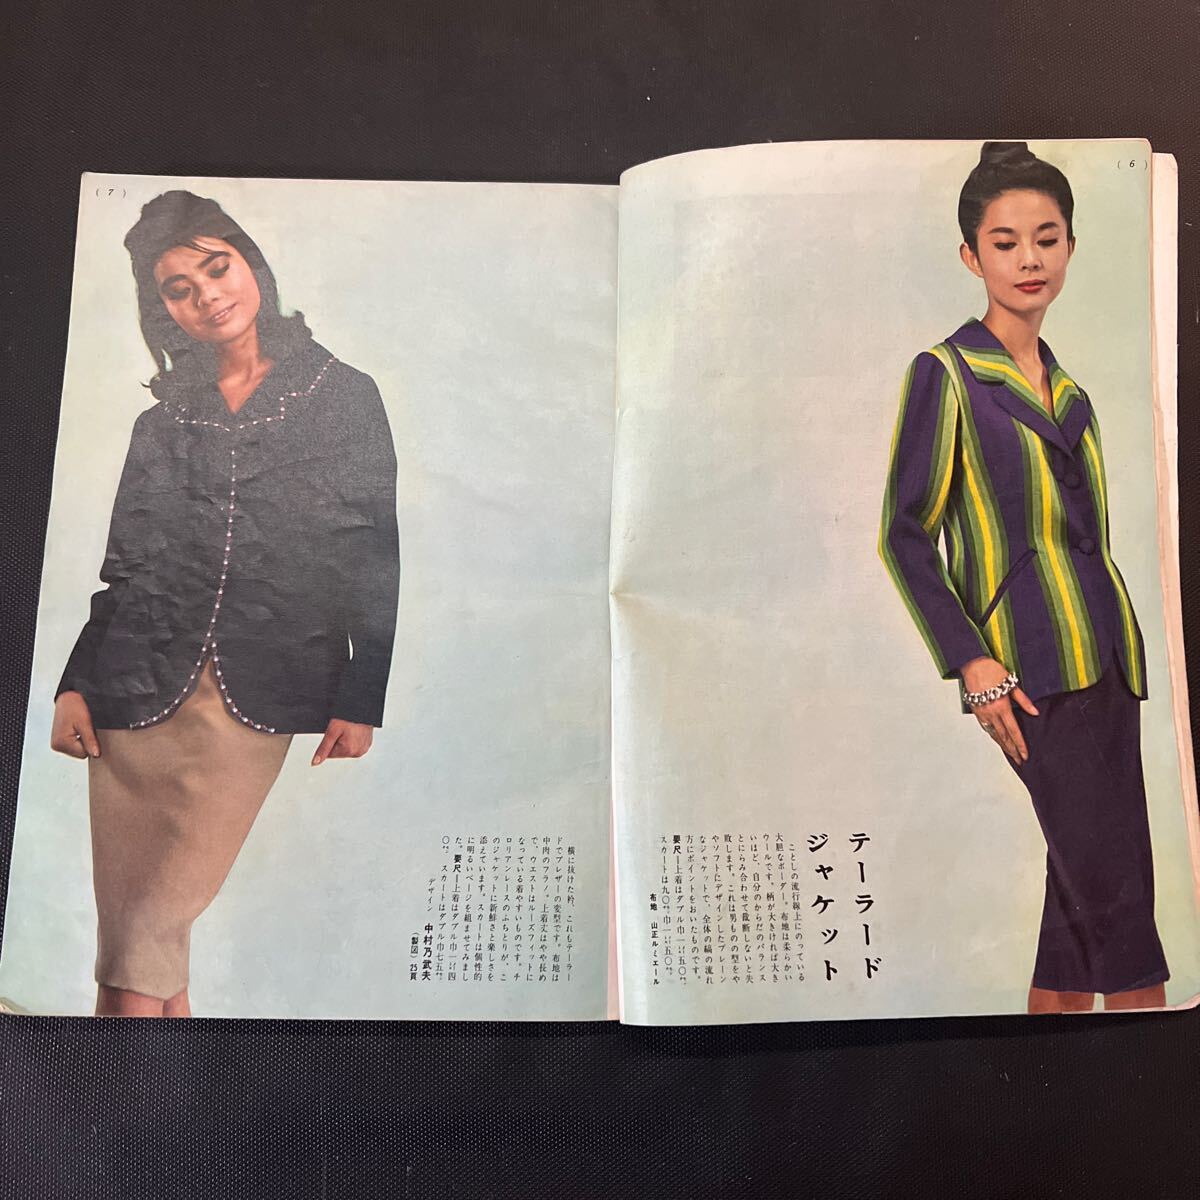  equipment . magazine so-en 1960 year 9 month number culture clothes equipment .. publish department Showa era 35 year that time thing Vintage rare retro secondhand book Showa Retro attire research appendix only 